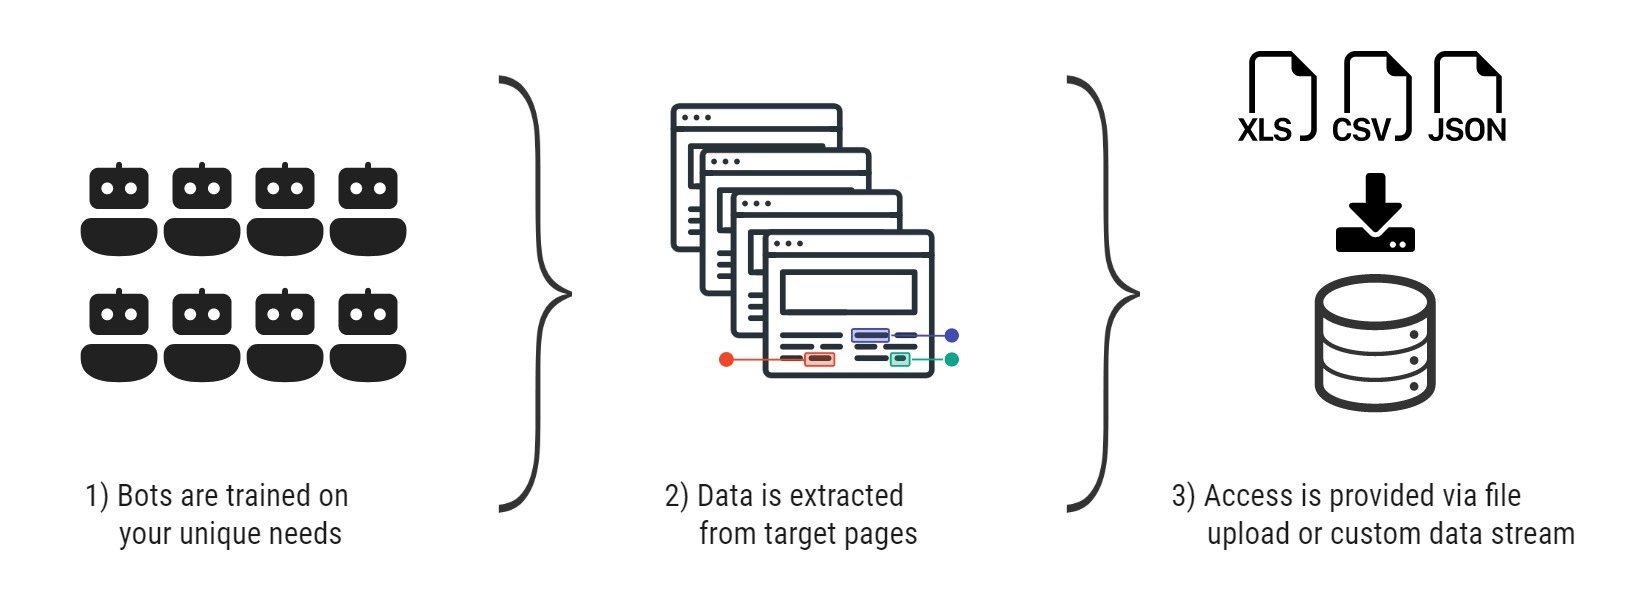 Infographic with 3 stages of web scraping: 1) Bots are trained on your unique needs; 2) Data is extracted from target pages; 3) Access is provided via file upload or custom data stream.